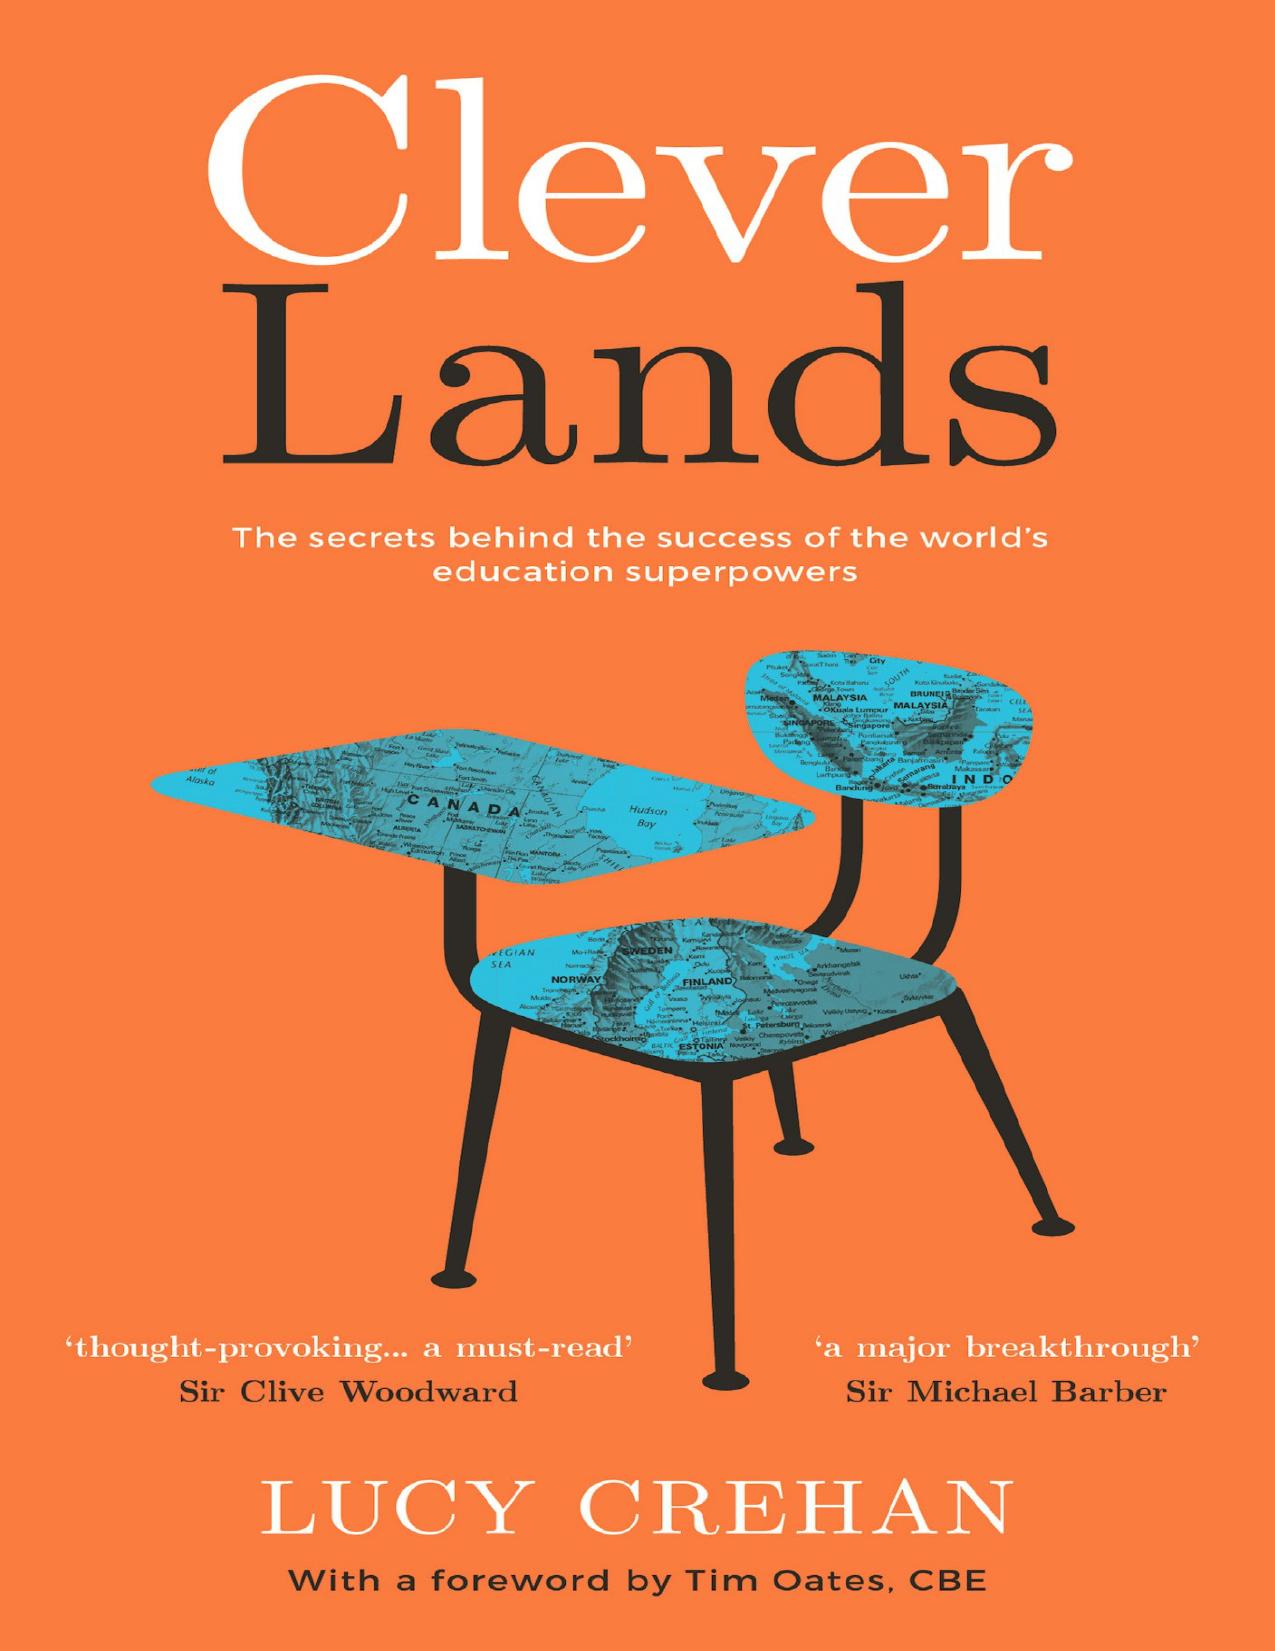 Cleverlands The Secrets Behind the Success of the World's Education Superpowers.jpg